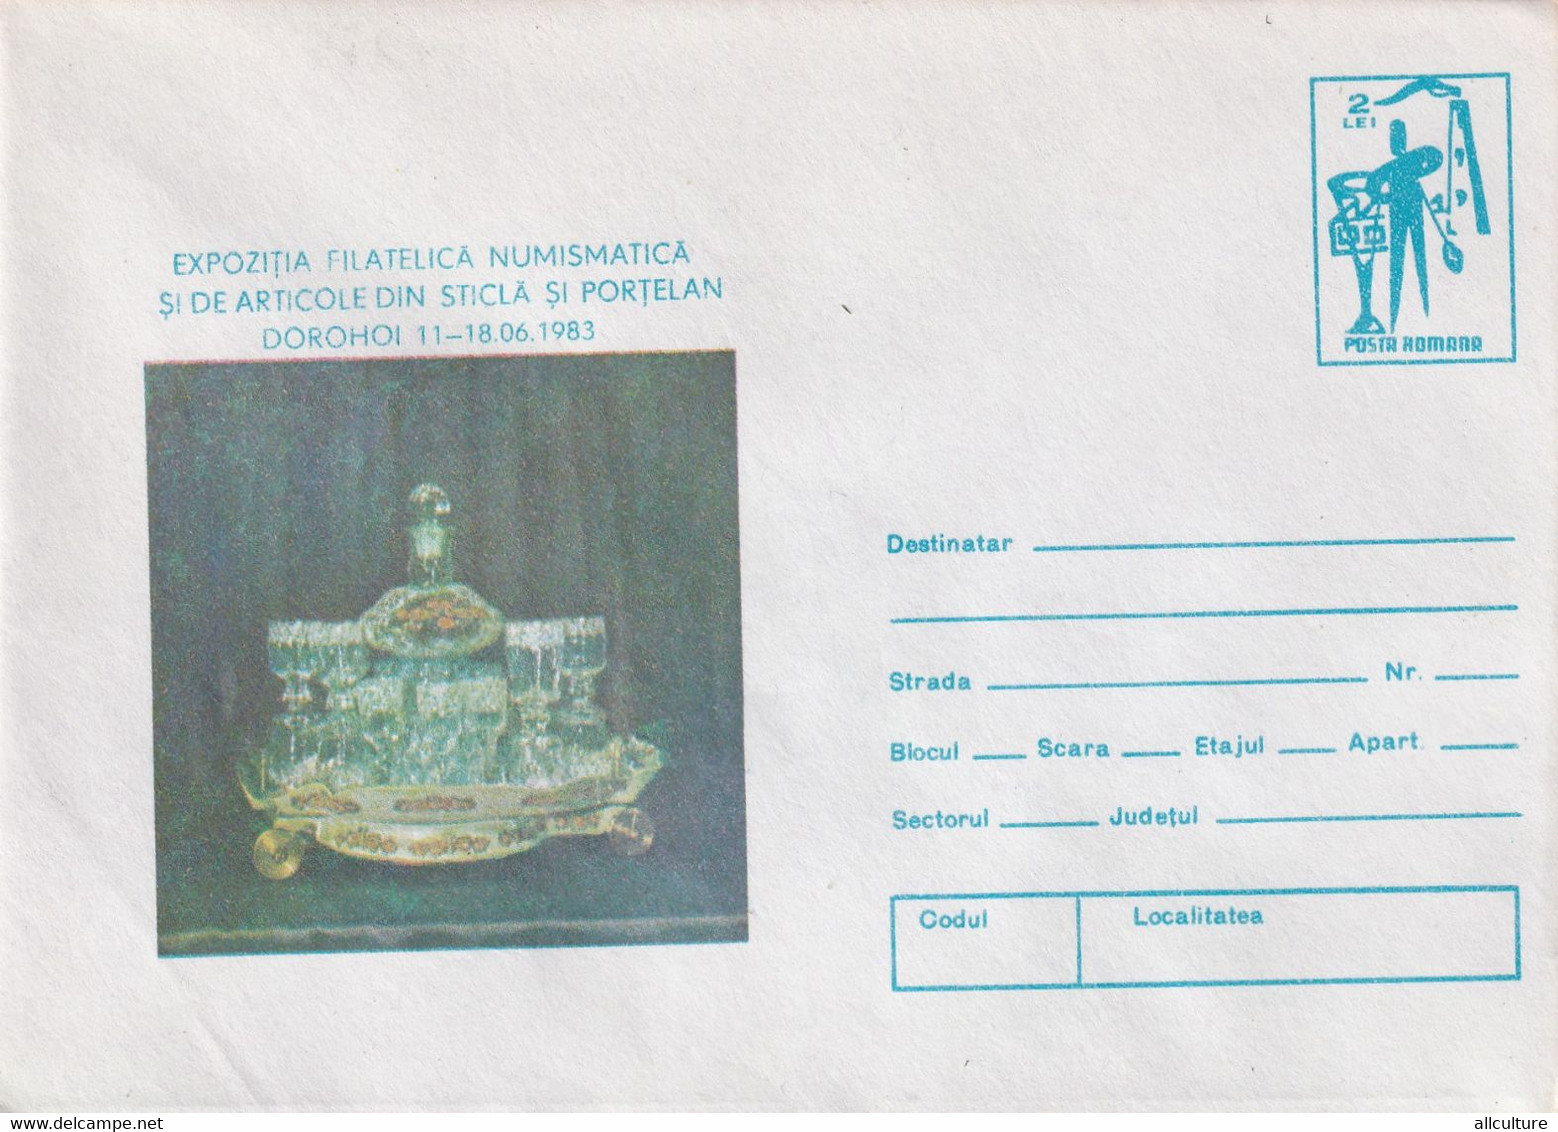 A3253-  Numismatic Philatelic Exhibition Of Glass And Porcelain Articles, Dorohoi 1983 Romanian Post Cover Stationery - Porcelain